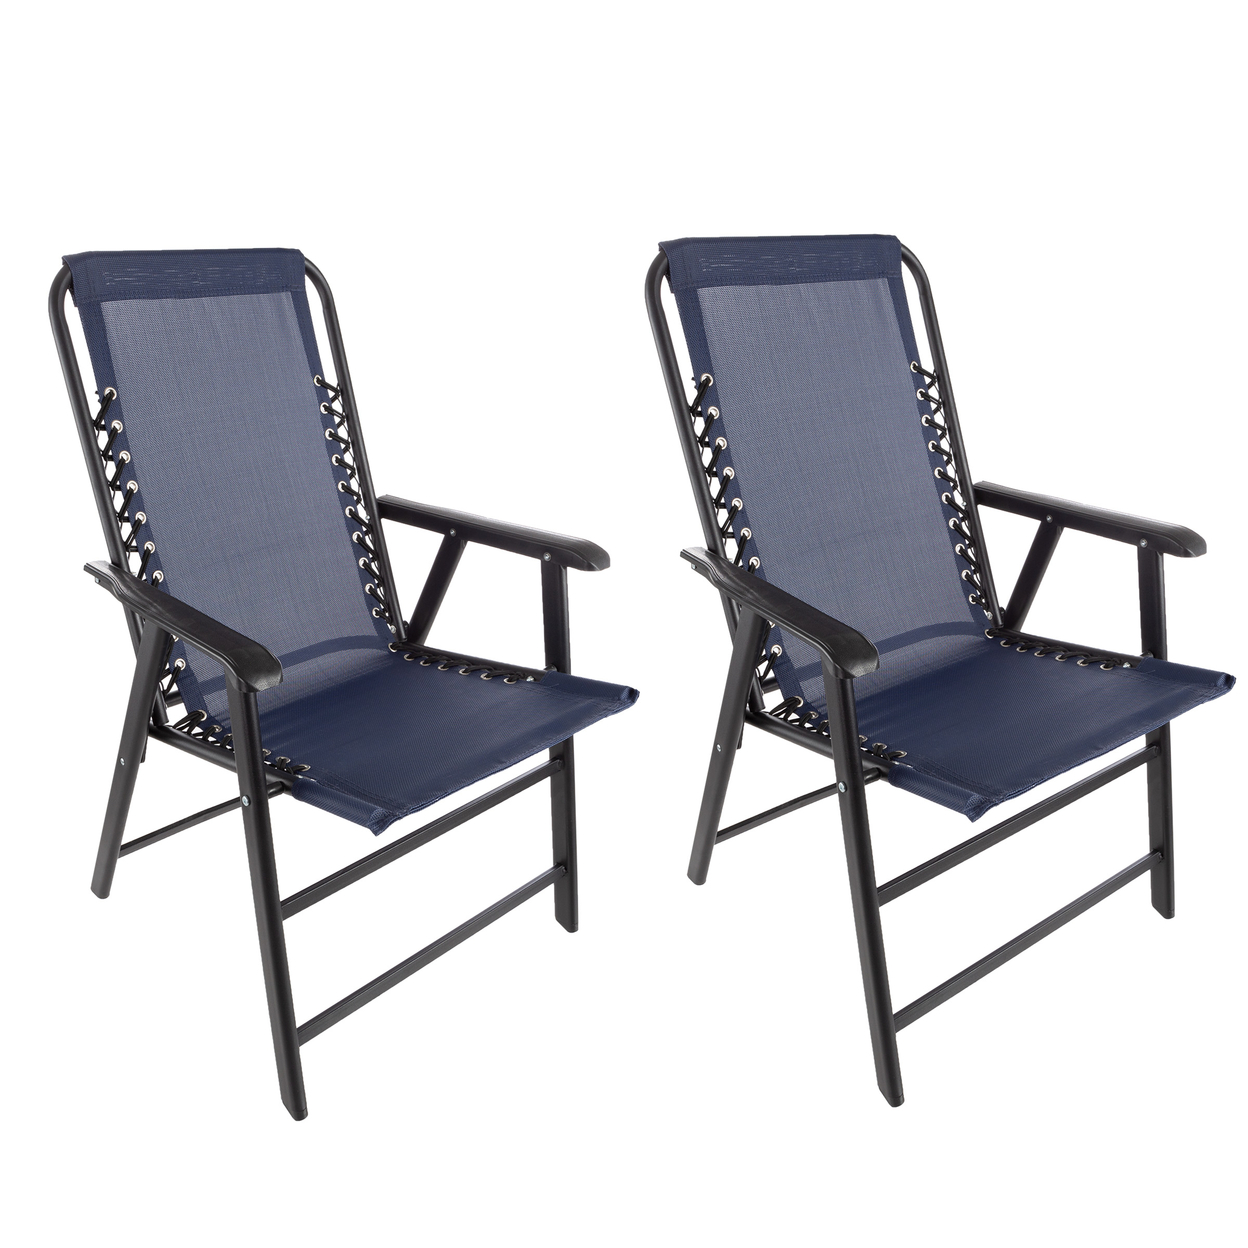 Set Of 2 Folding Camping Chairs Textilene Bungee Suspension Portable Lounge